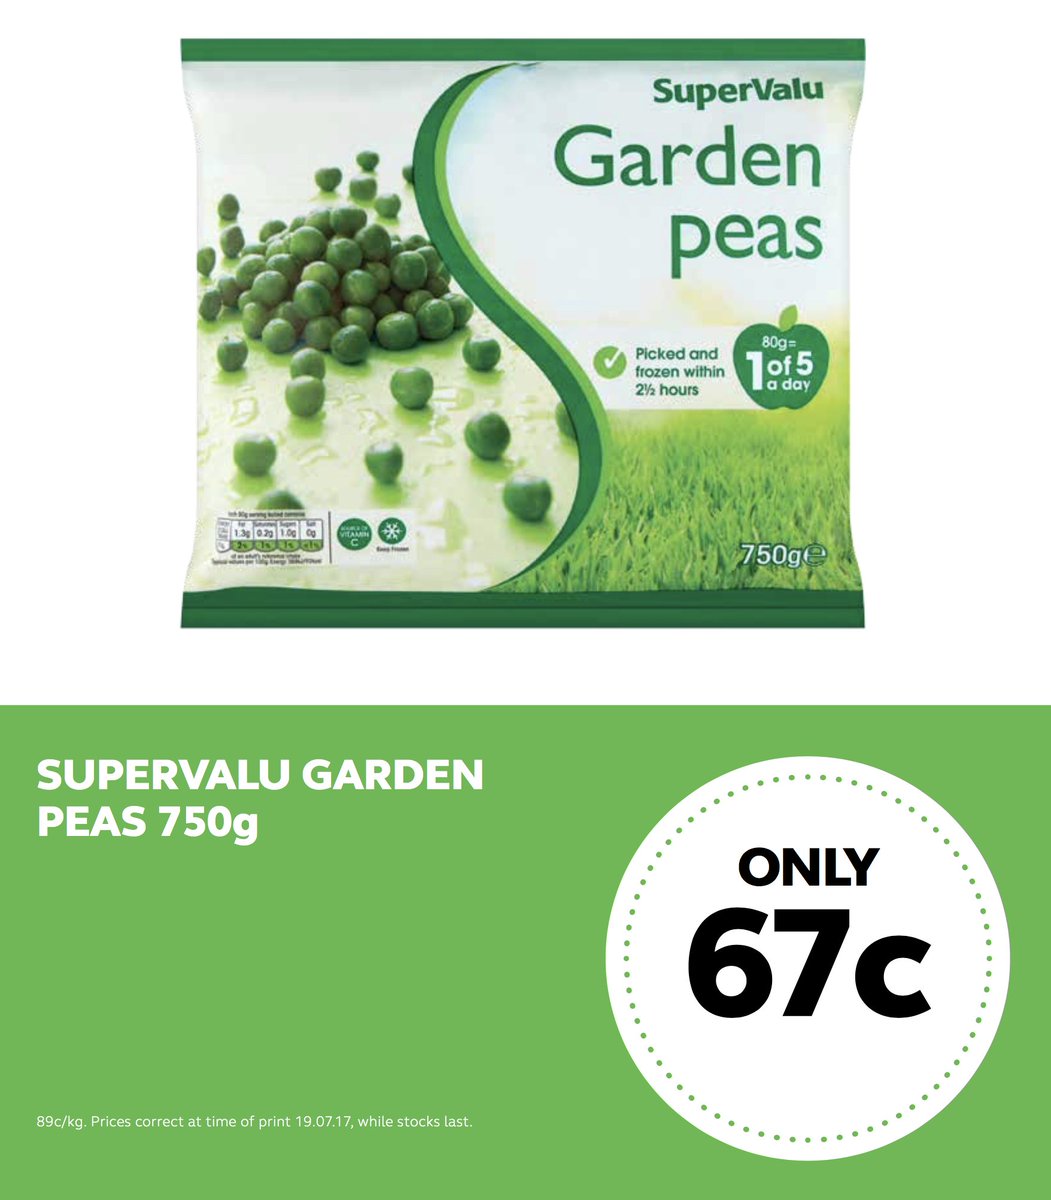 Every Day Low Prices...Just Look for the Green Signs in store https://t.co/8yMvKFSDMb